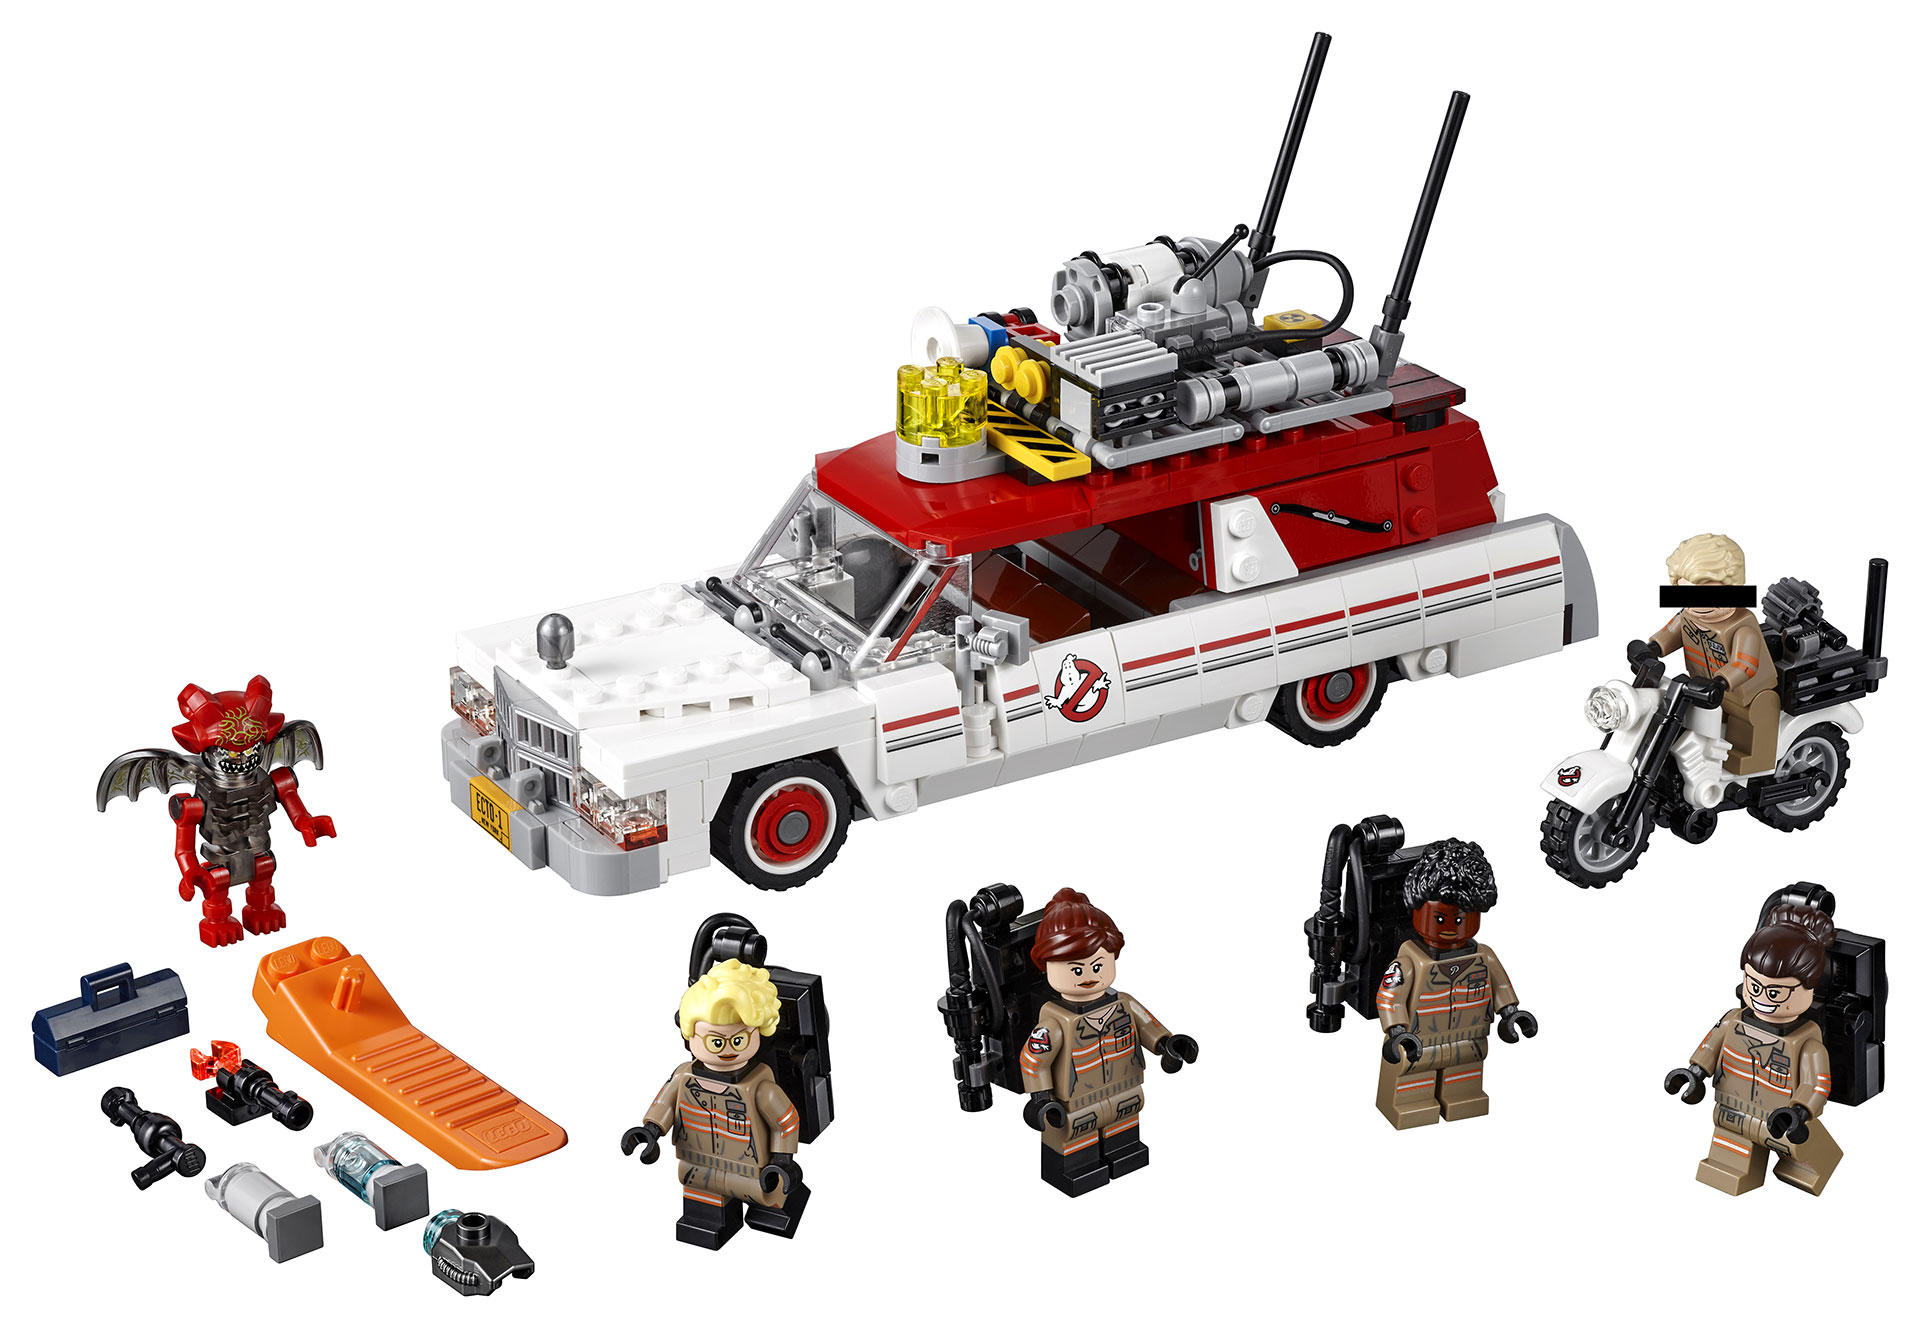 The New Ghostbusters (And Kevin) Get The LEGO Treatment